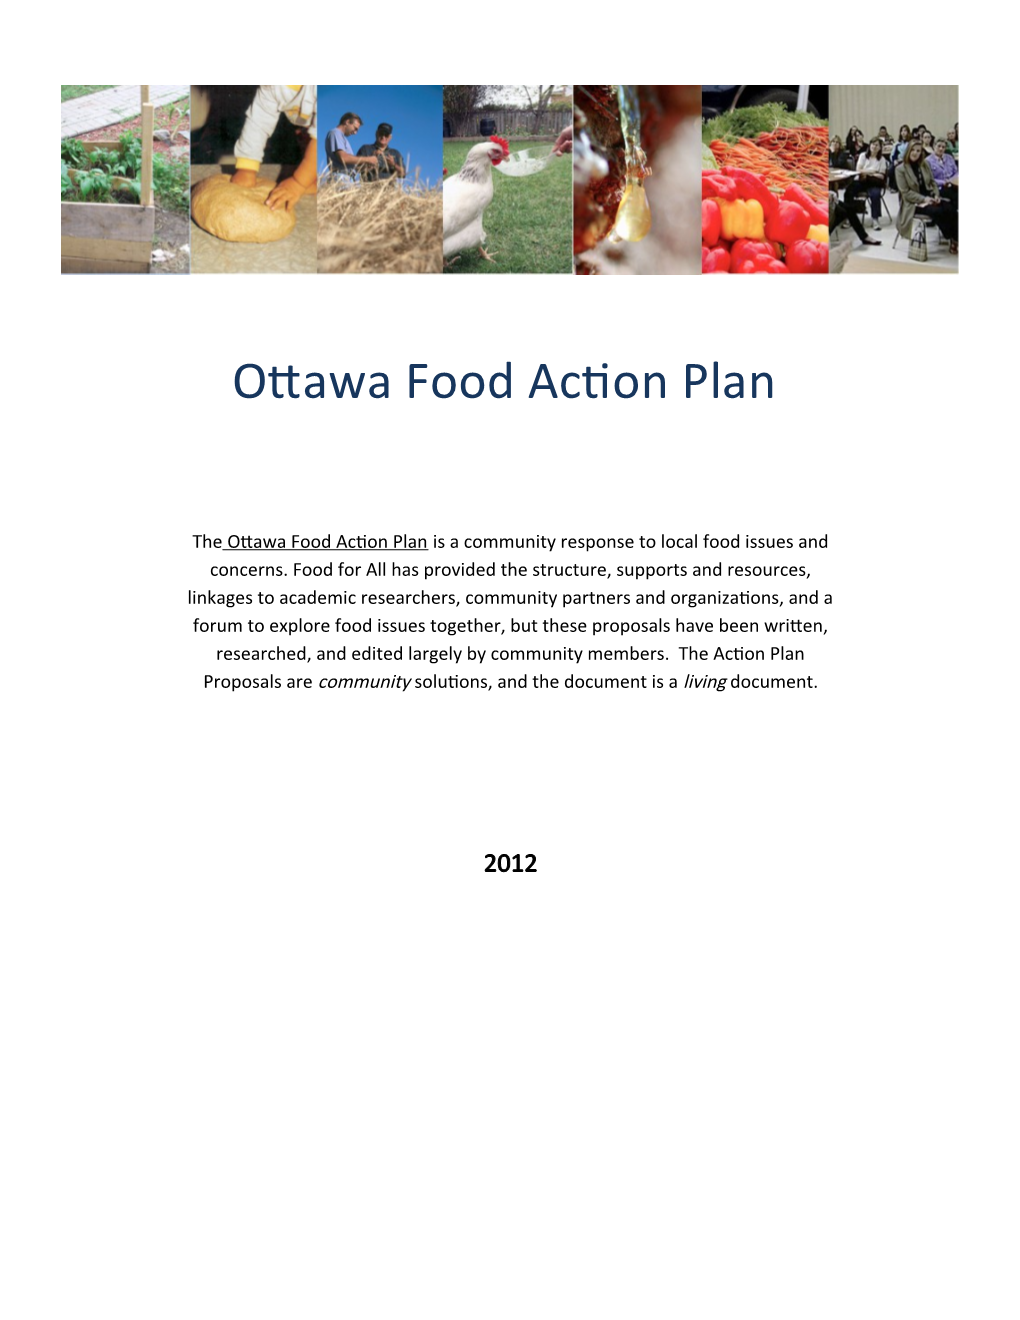 Ottawa Food Action Plan Is a Community Response to Local Food Issues and Concerns